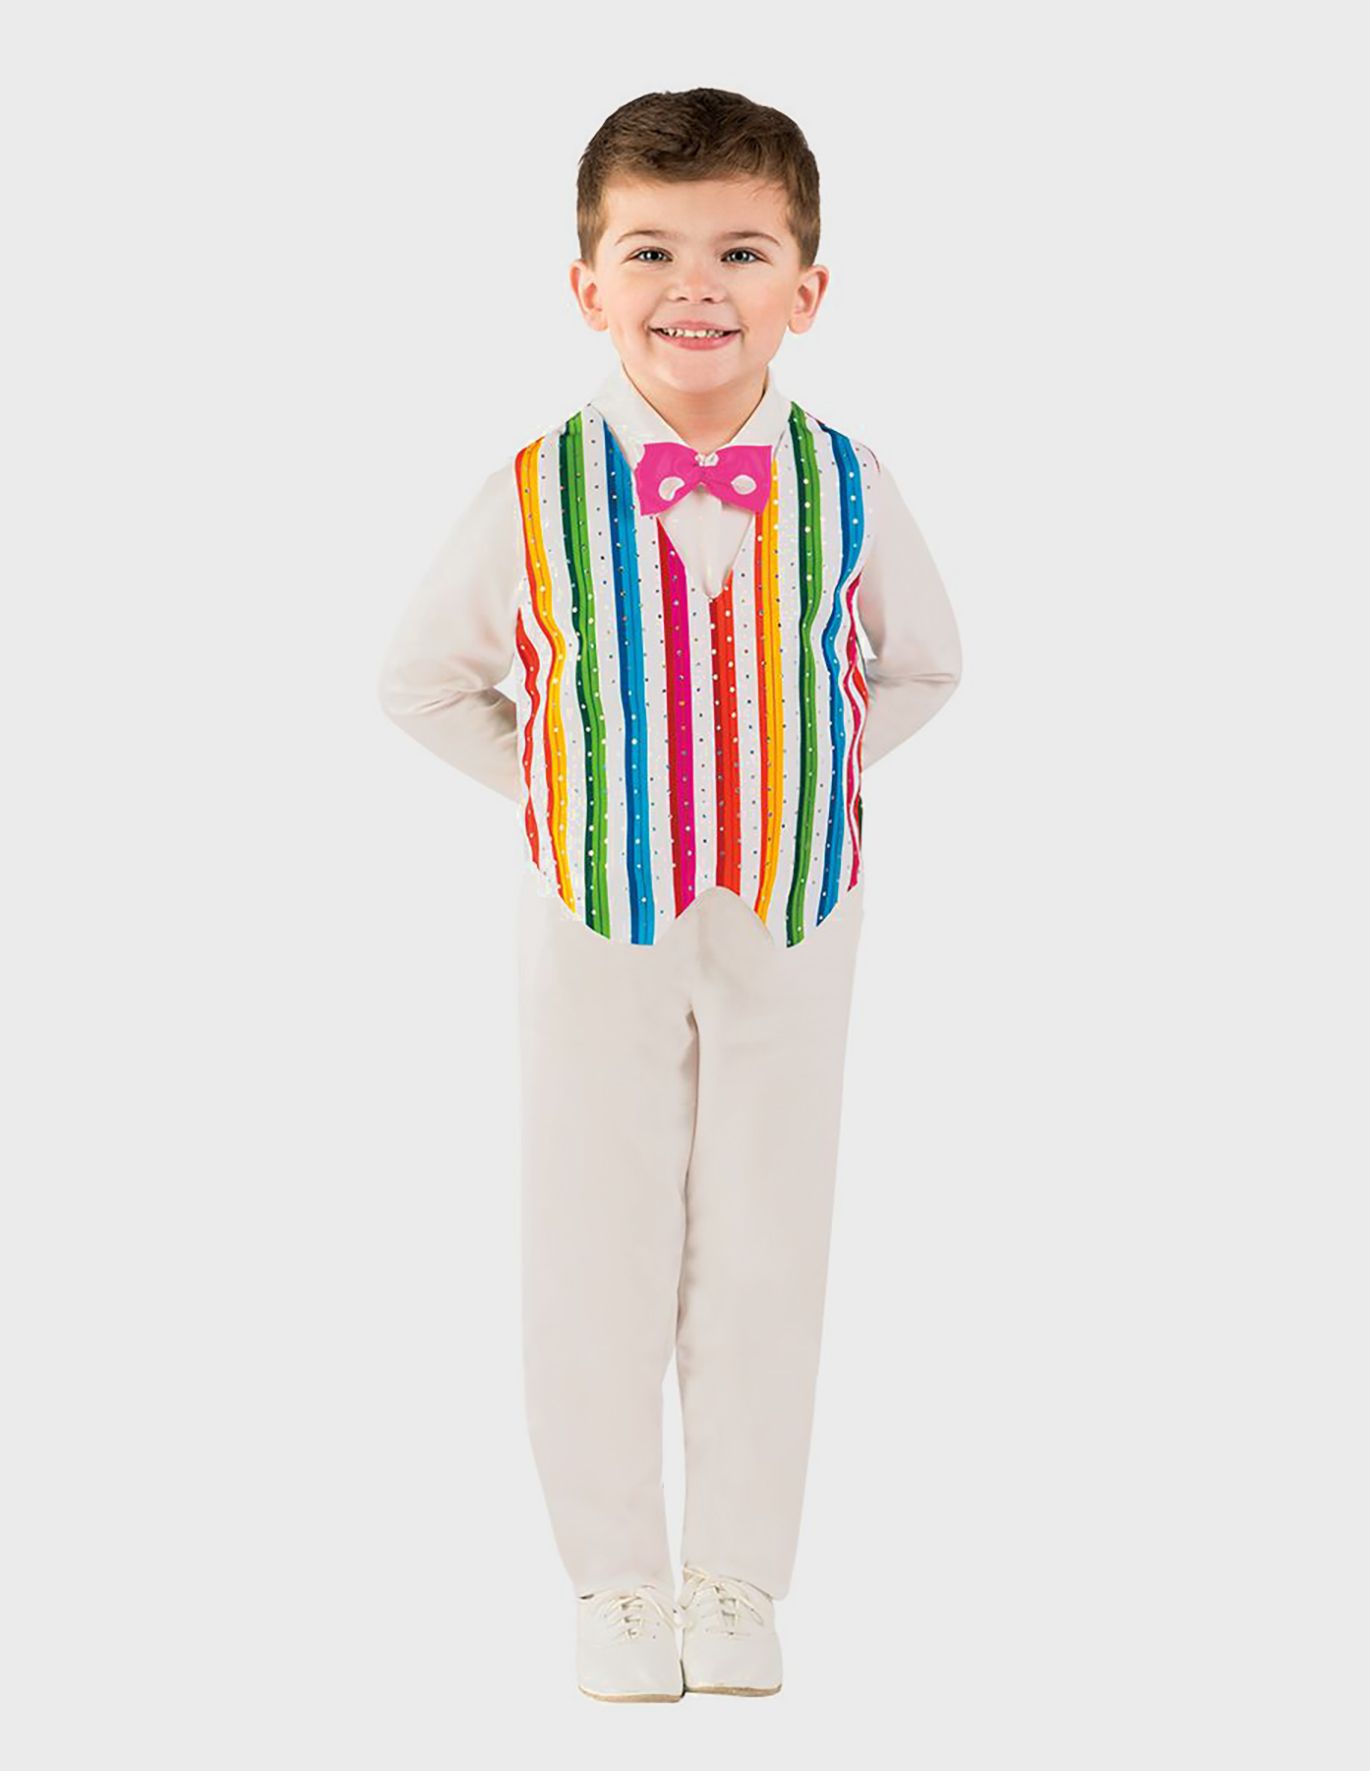 Costume Gallery Candyman Boy's Vest and Bow Tie